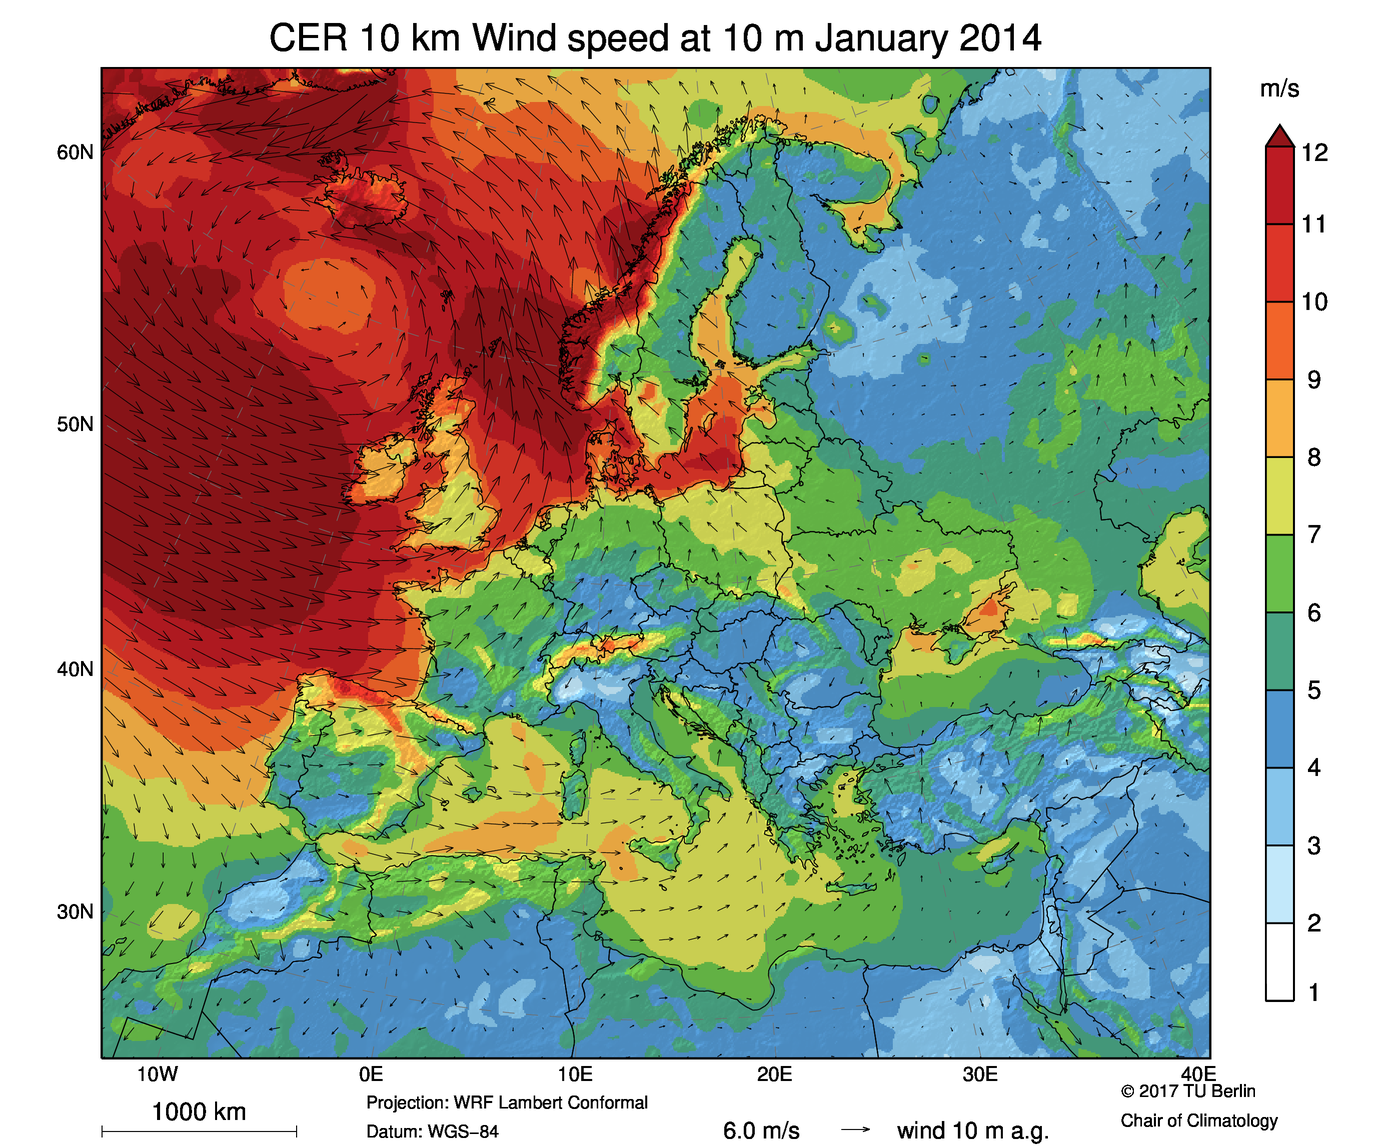 Mean wind speed at 10 m in January 2014